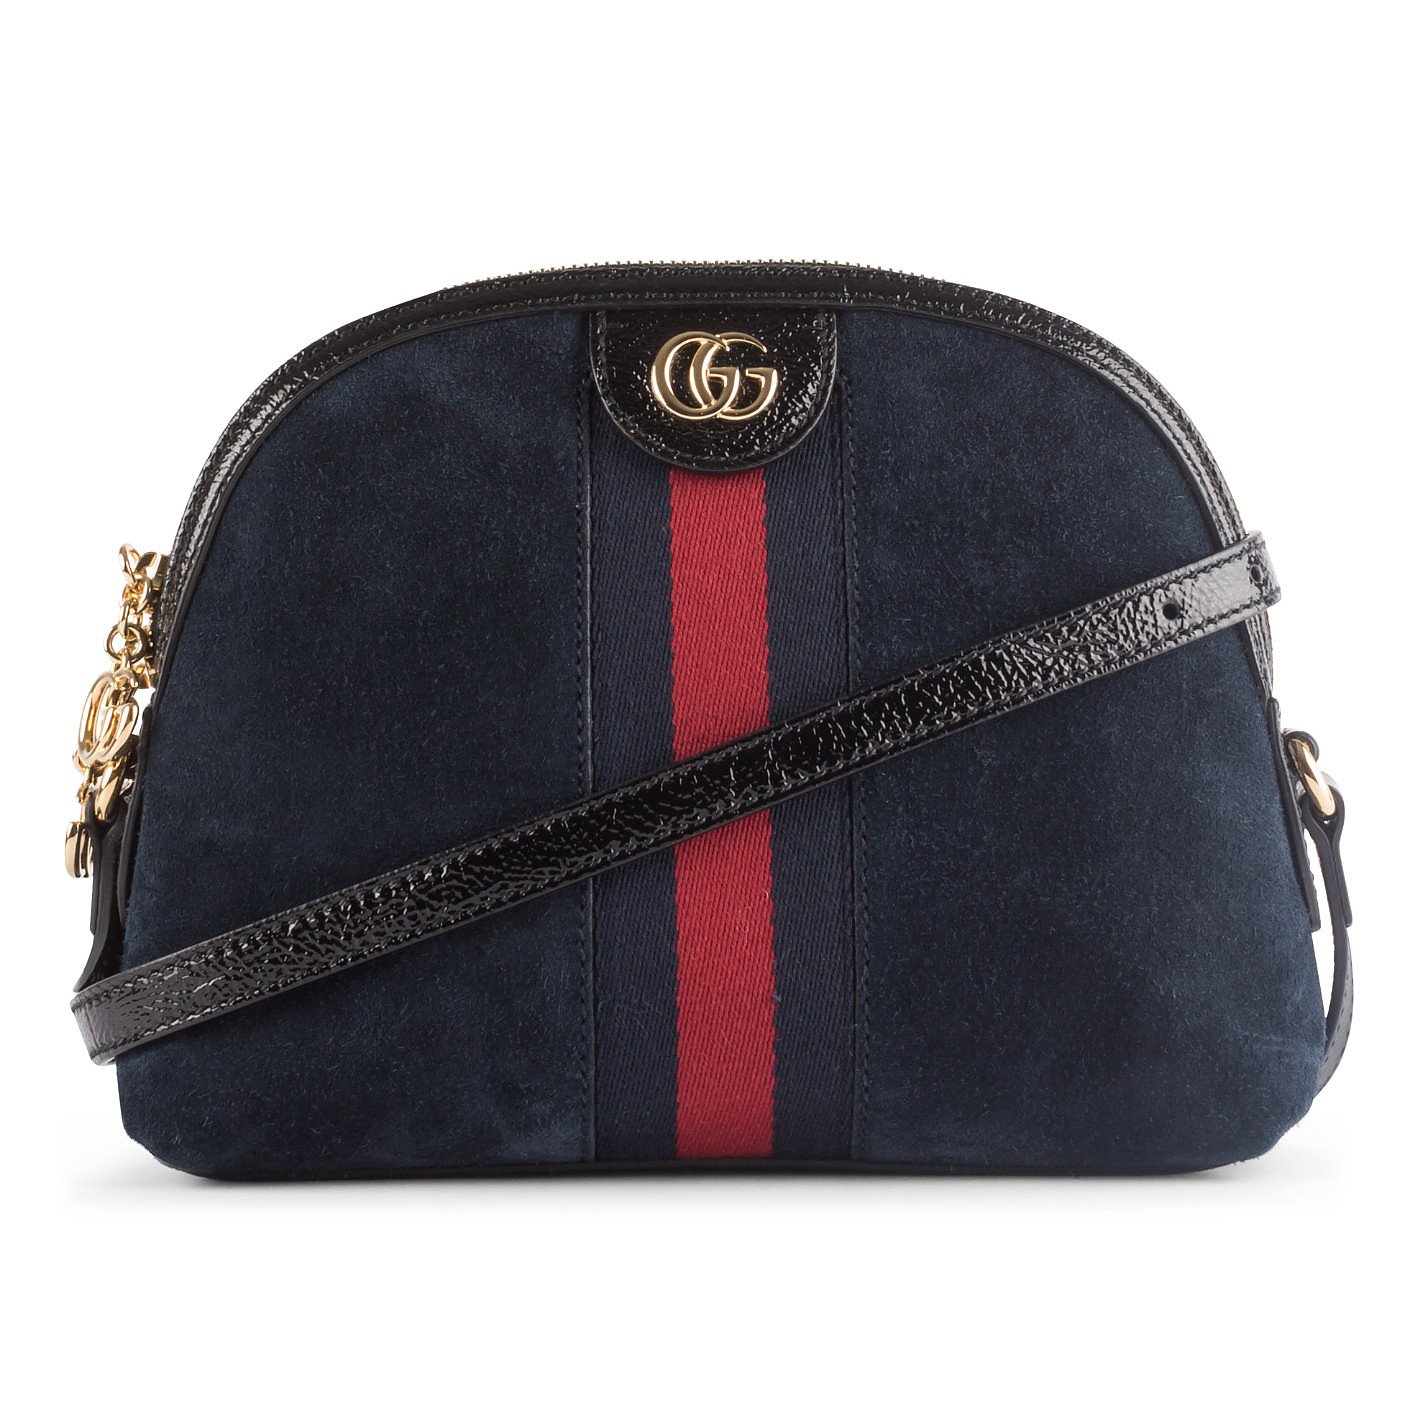 Rent or Buy Gucci Dome Ophidia Small Suede Shoulder Bag from www.myhandbagsusa.com/louis-vuitton/